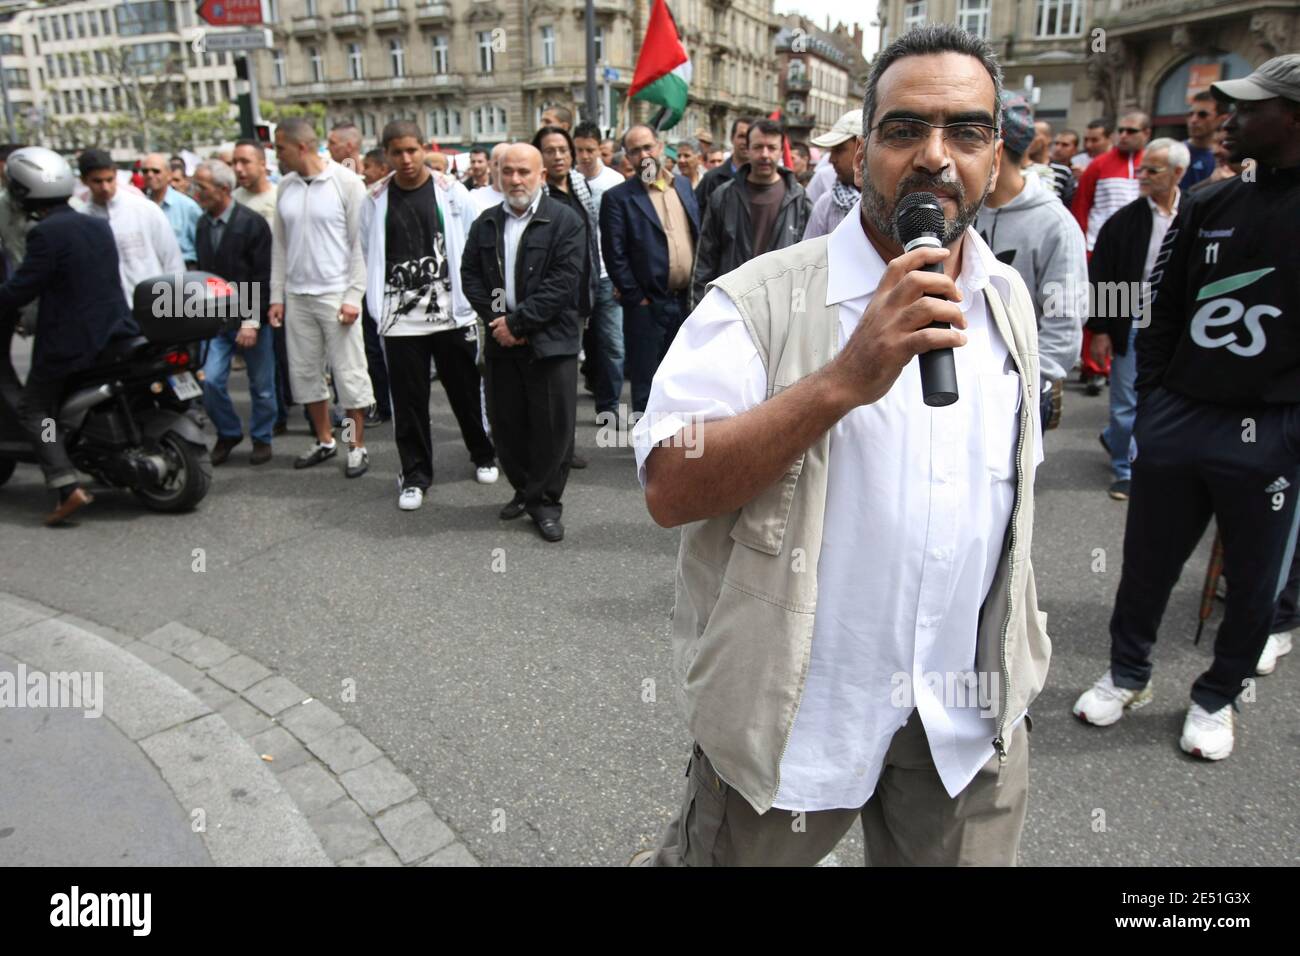 French Moslems Party (PMF) leader Mohamed Latreche leads a demonstration to protest Israel's creation in Strasbourg, eastern France on May 17, 2008. Photo by Antoine/ABACAPRESS.COM Stock Photo